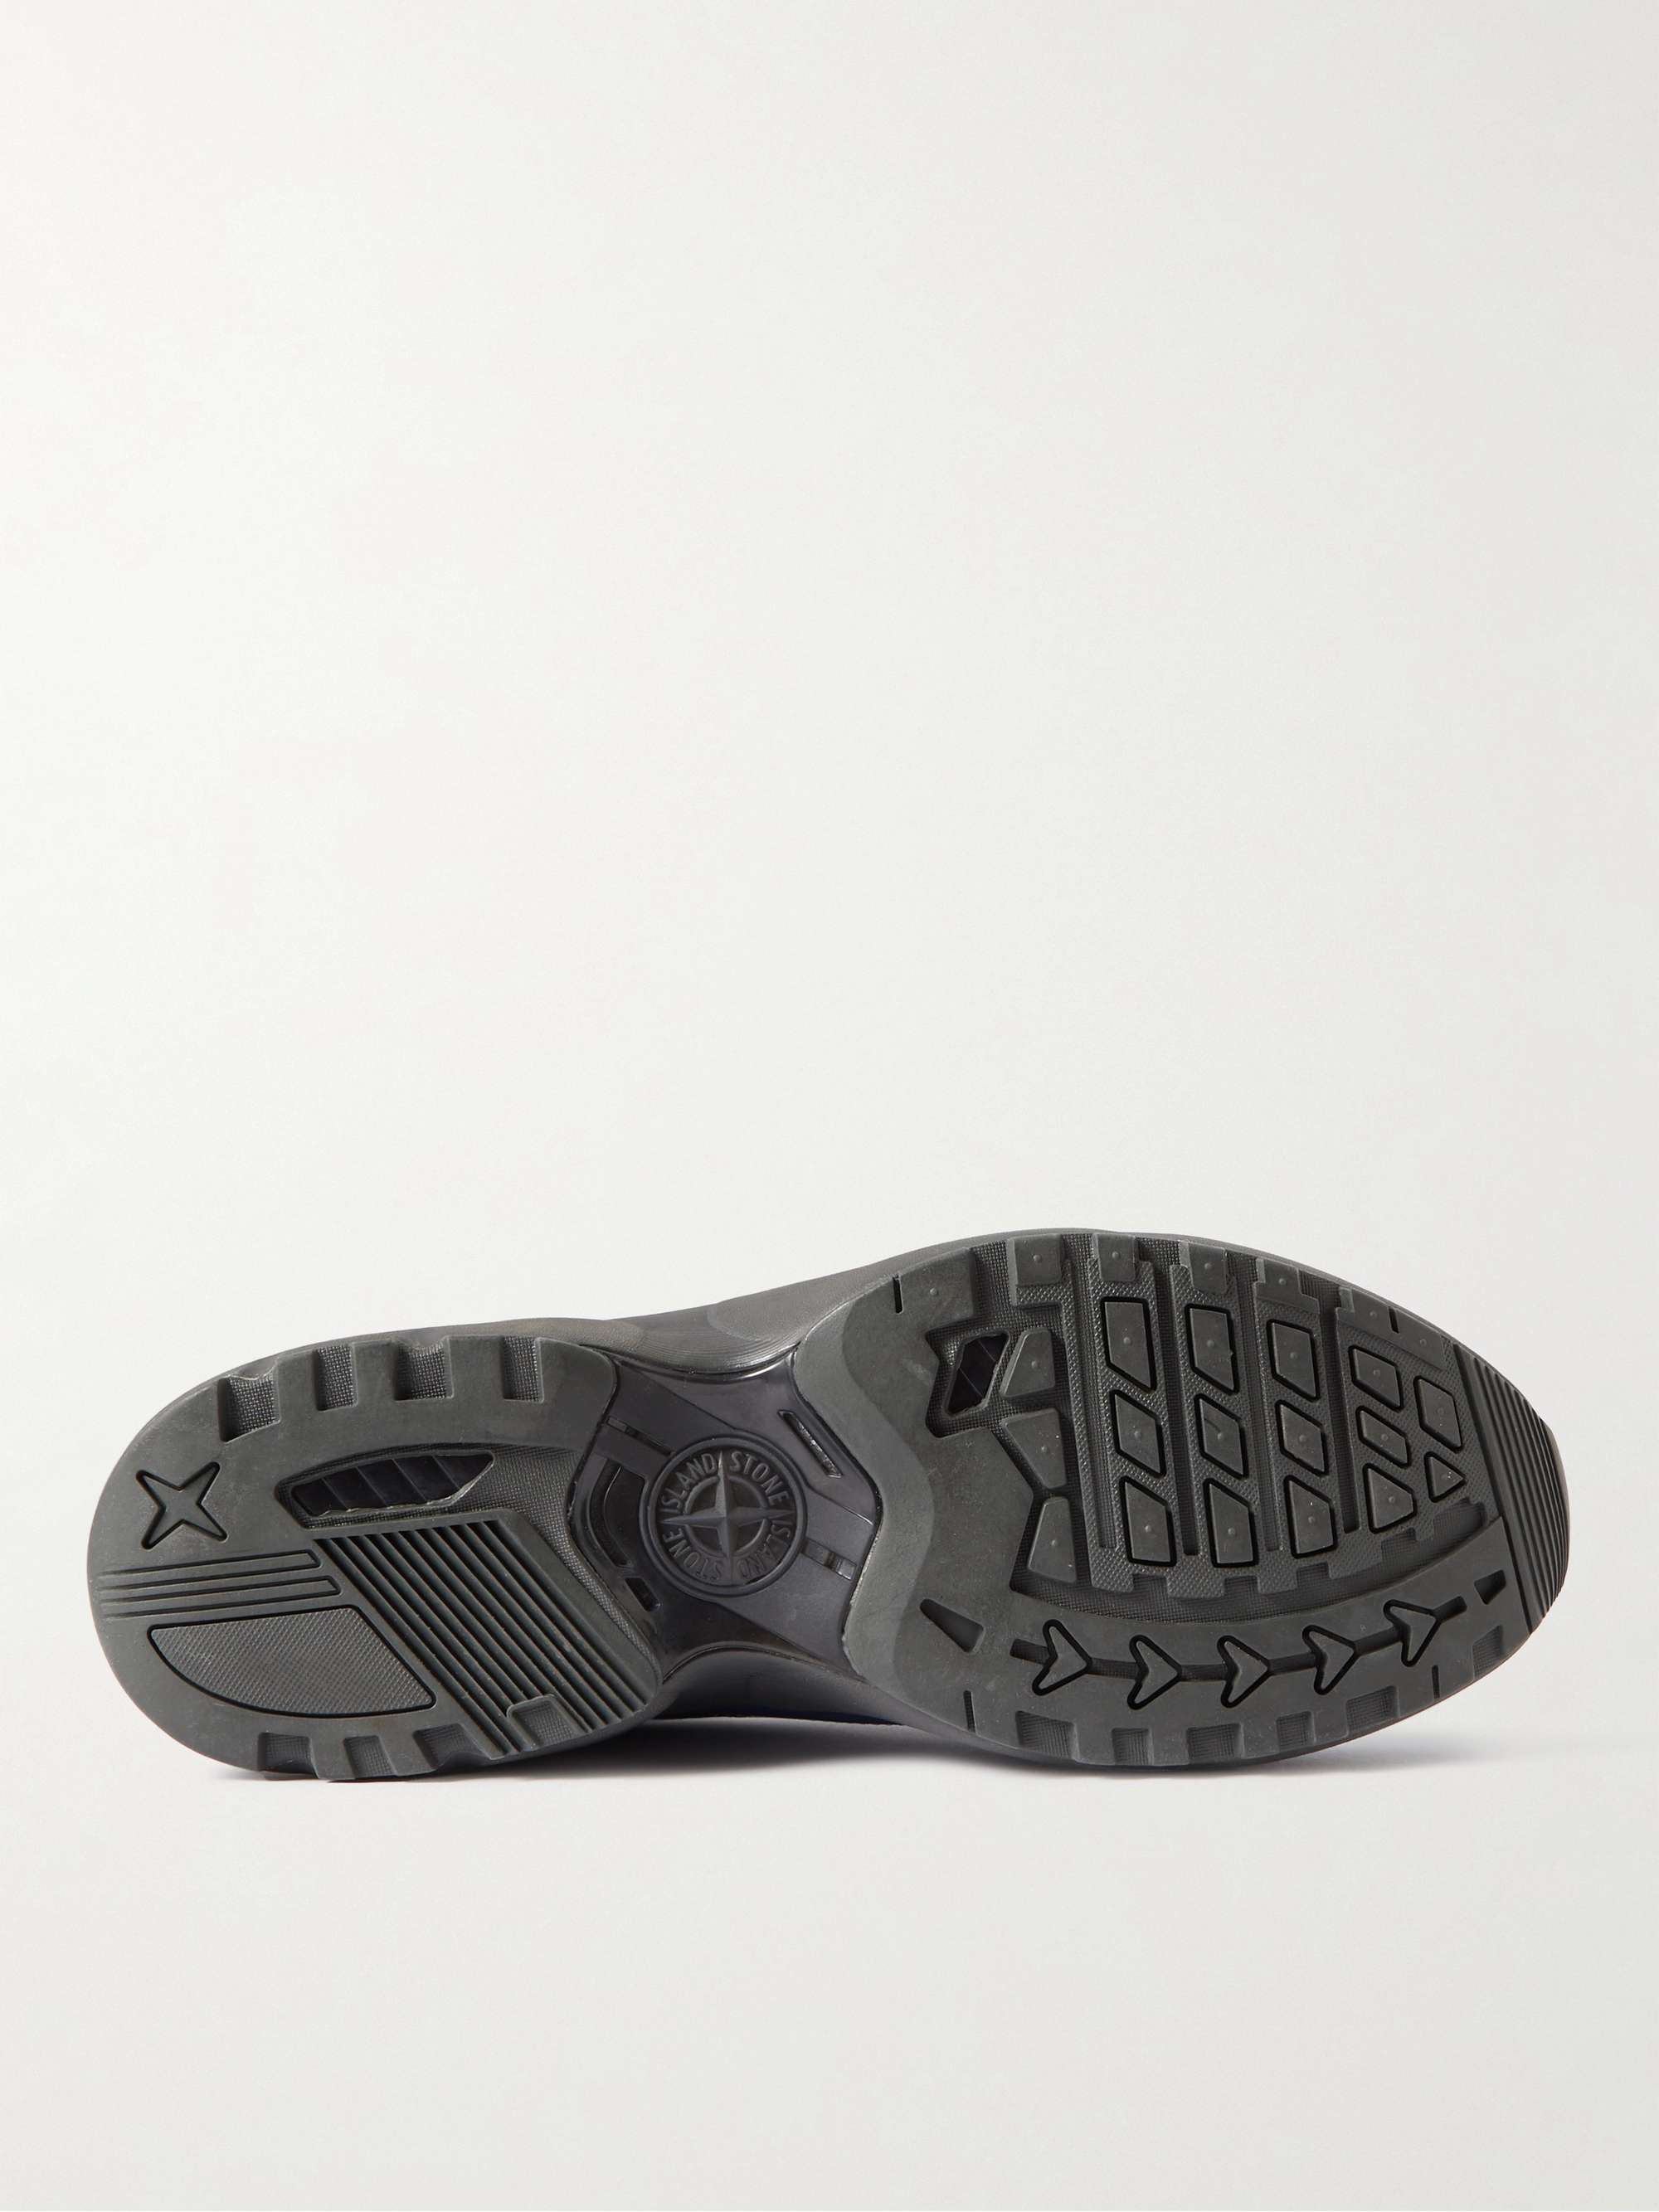 STONE ISLAND Grime Rubber-Trimmed Printed Mesh Sneakers